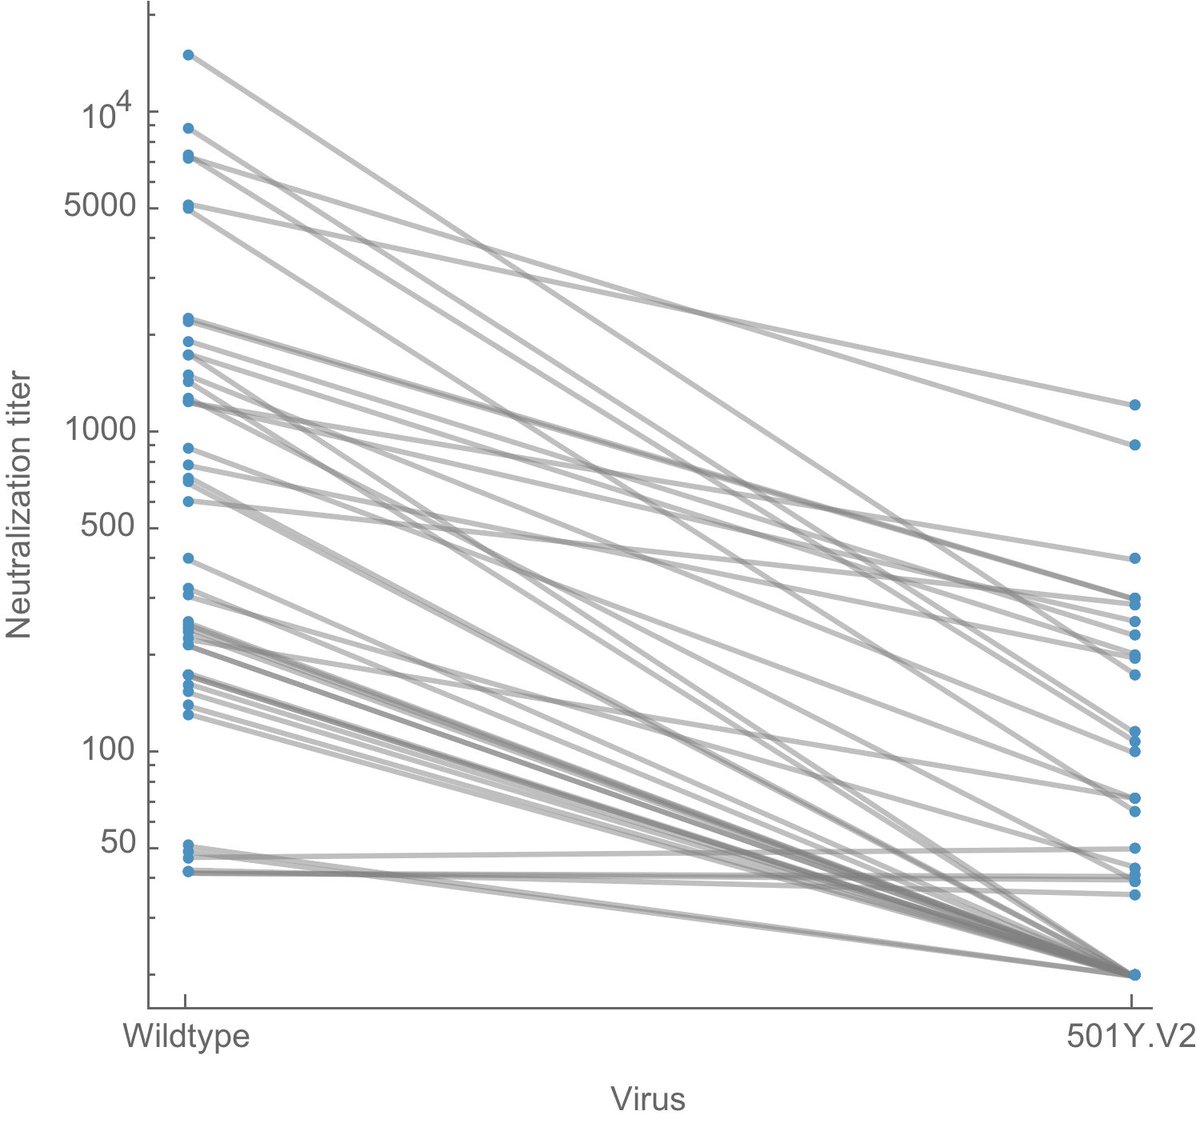 Here, I've replotted data from the preprint to make effect size a bit more clear. Each line is sera from one individual tested against wildtype virus on the left and 501Y.V2 variant virus on the right. Note the log y axis (as is common with this type of data). 2/10